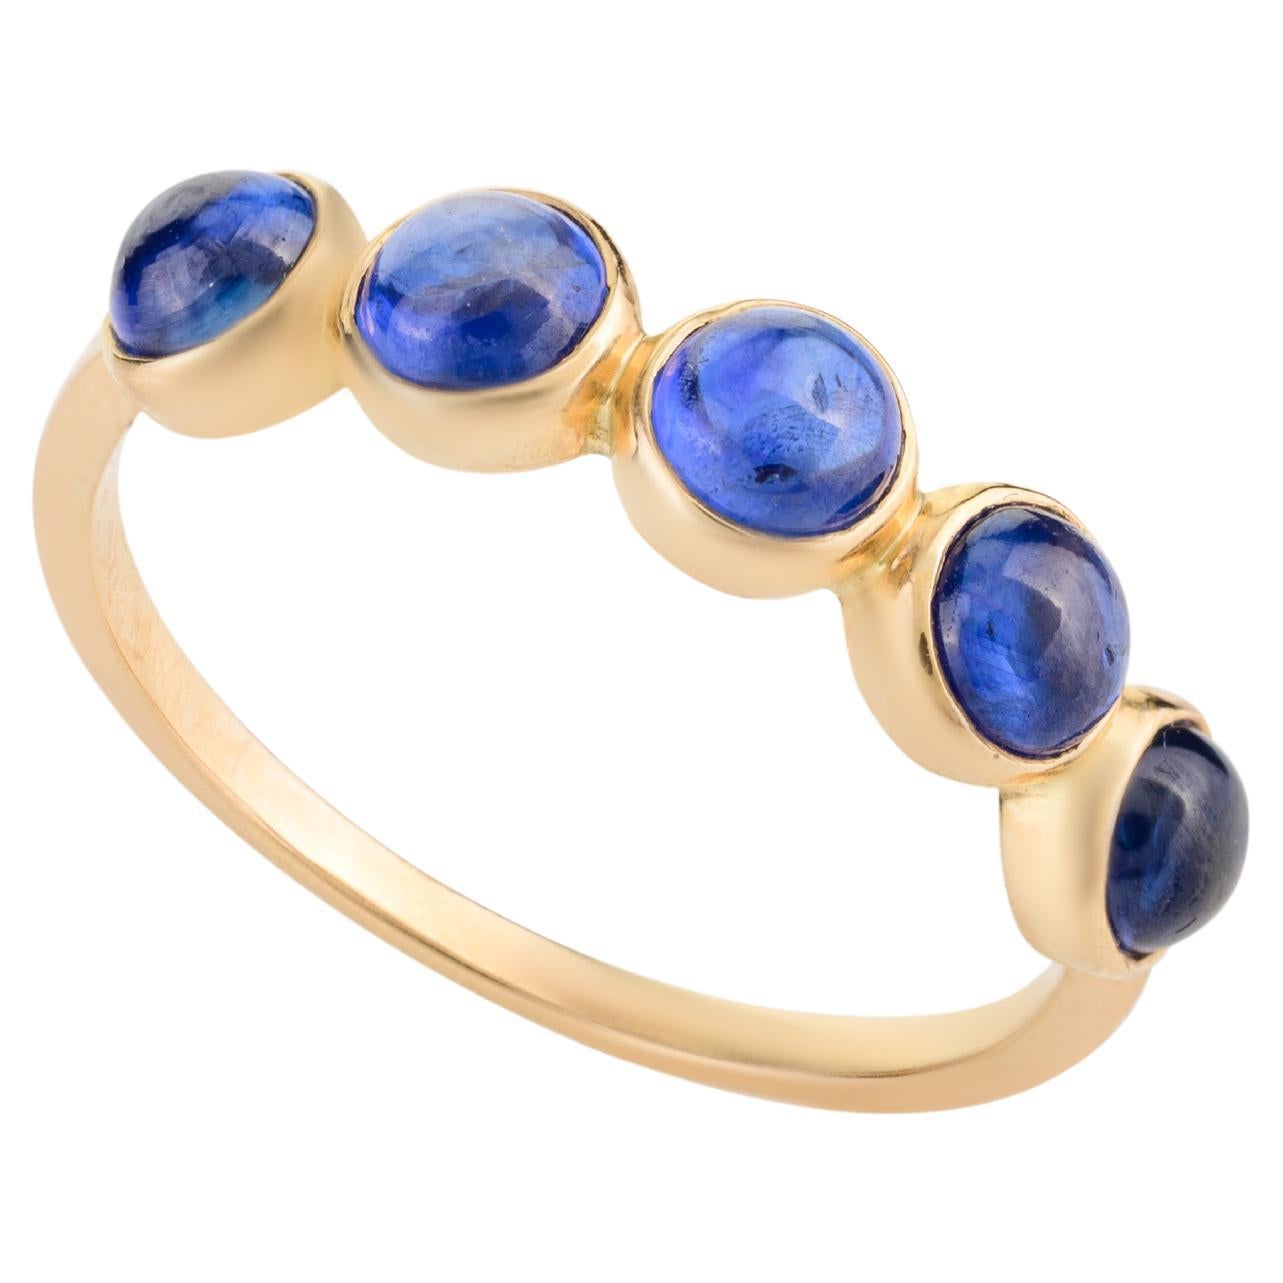 For Sale:  Blue Sapphire Bezel Set Band Stacking Ring in 14k Solid Yellow Gold Gift for Her